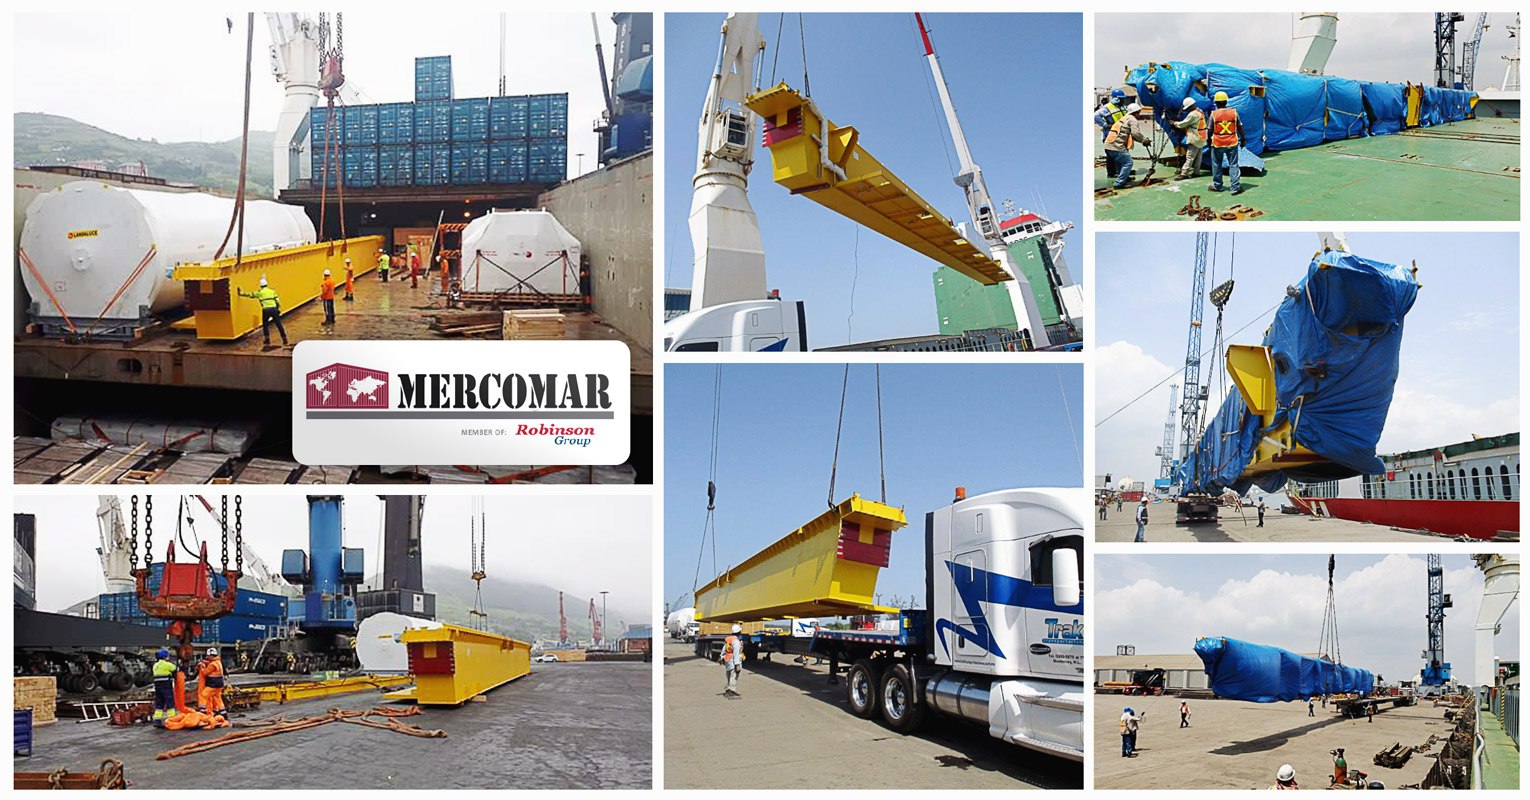 Mercomar Handled the 2nd Delivery of Equipment From Blibao to Altamira for the Pesquerõa Project